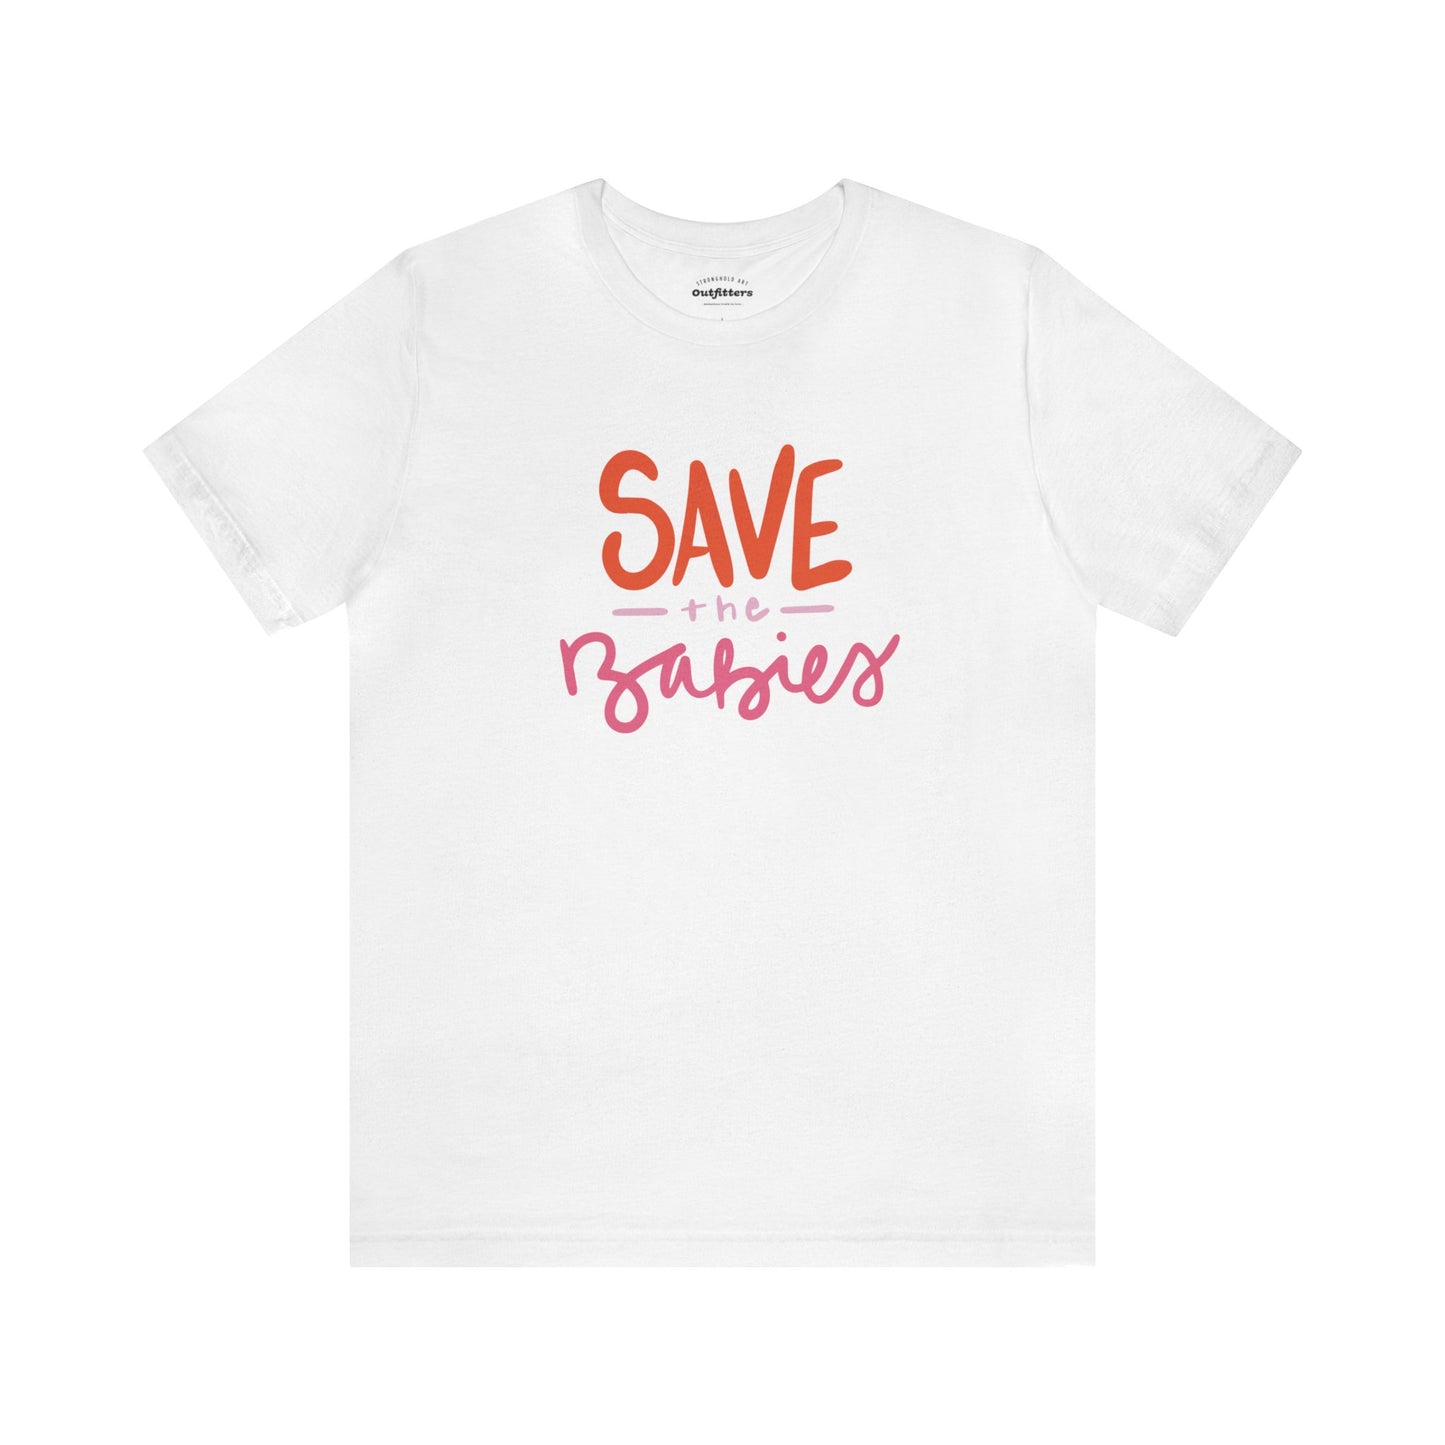 Save the Babies | Pregnancy center Donation | T-shirt